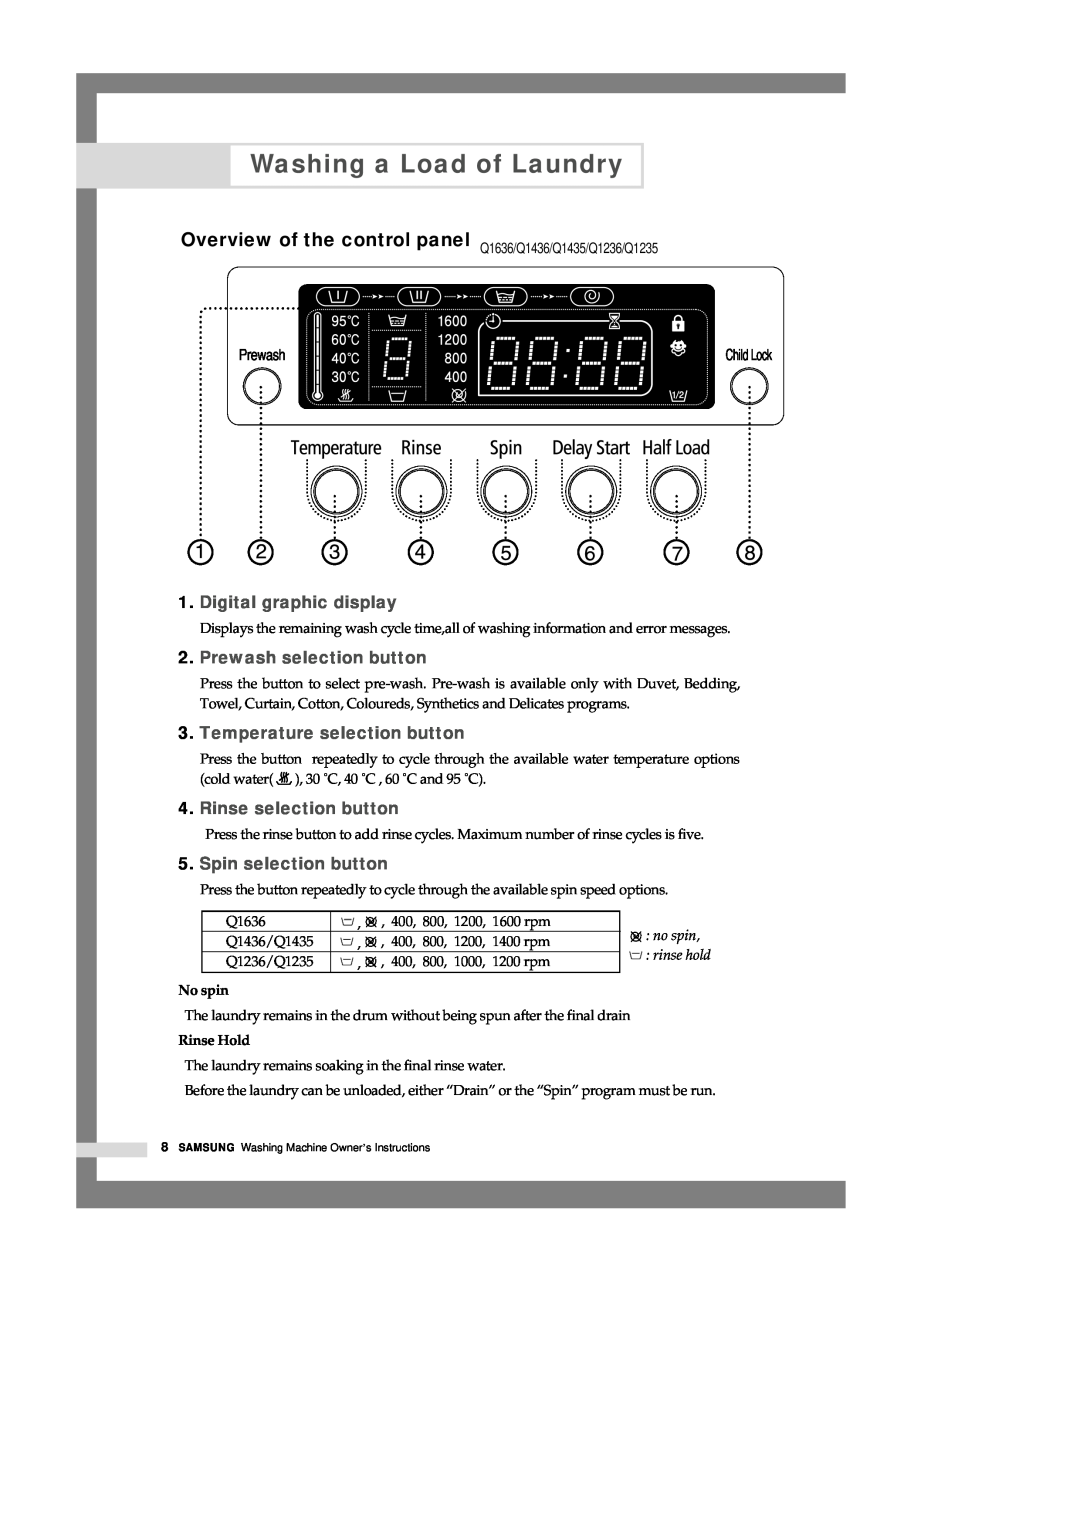 Samsung Q1636VGW/XEF manual Washing a Load of Laundry, Overview of the control panel Q1636/Q1436/Q1435/Q1236/Q1235, No spin 